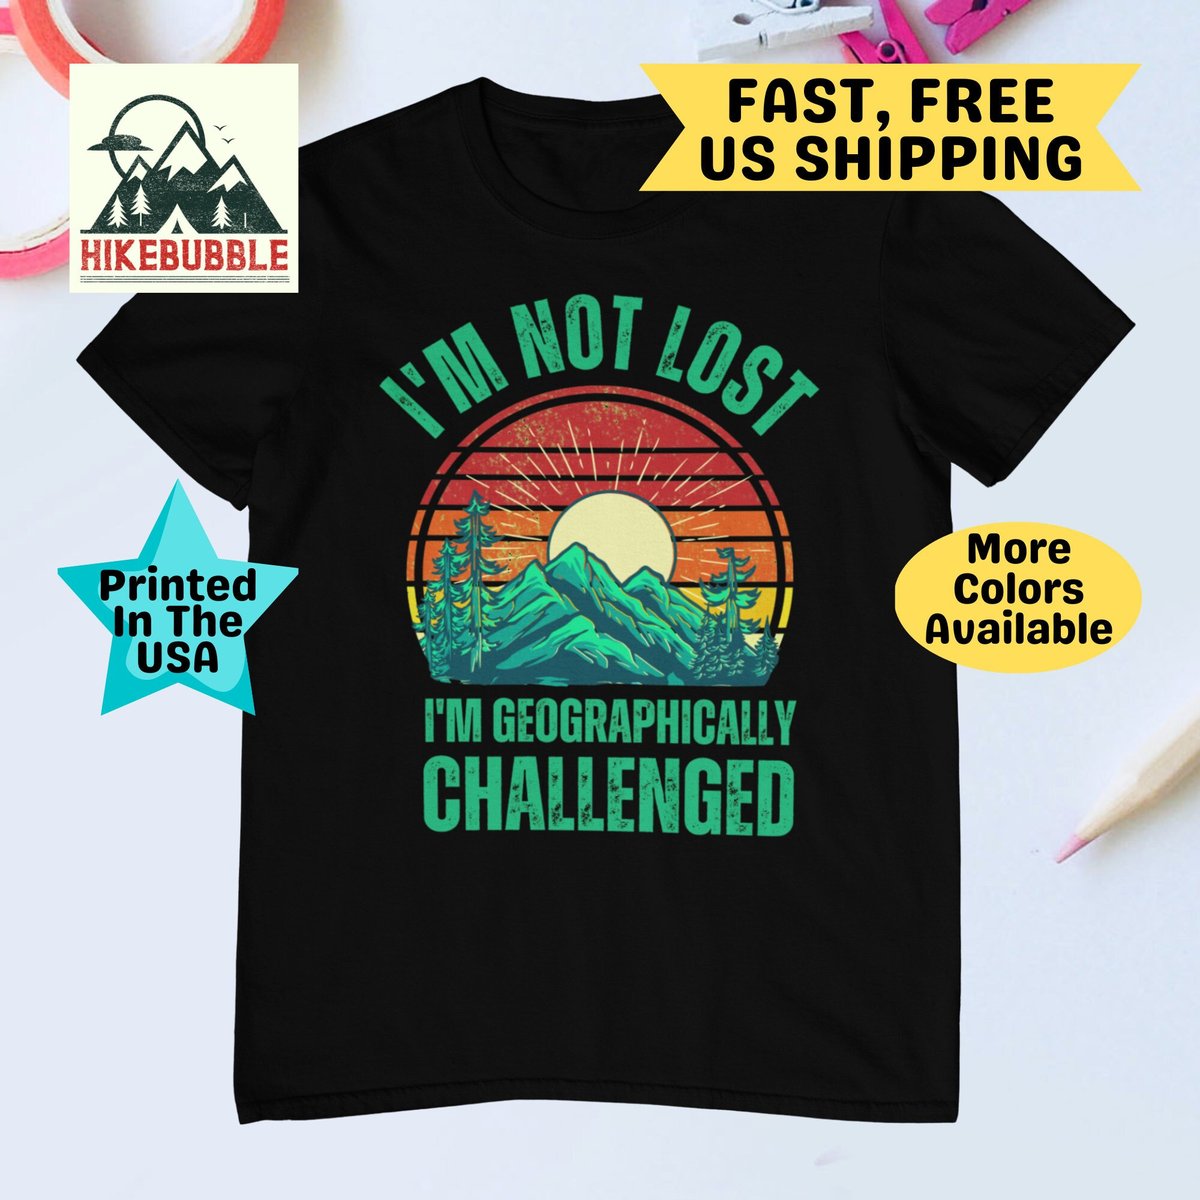 I'm Not Lost, I'm Geographically Challenged. Hiking shirt, funny hiking, hiking joke, outdoor life, hiking lover etsy.me/3XrobJS #streetwear #shortsleeve #crew #imnotlost #hikinglover #themountain #funnyhiking #rockymountain #treehugger